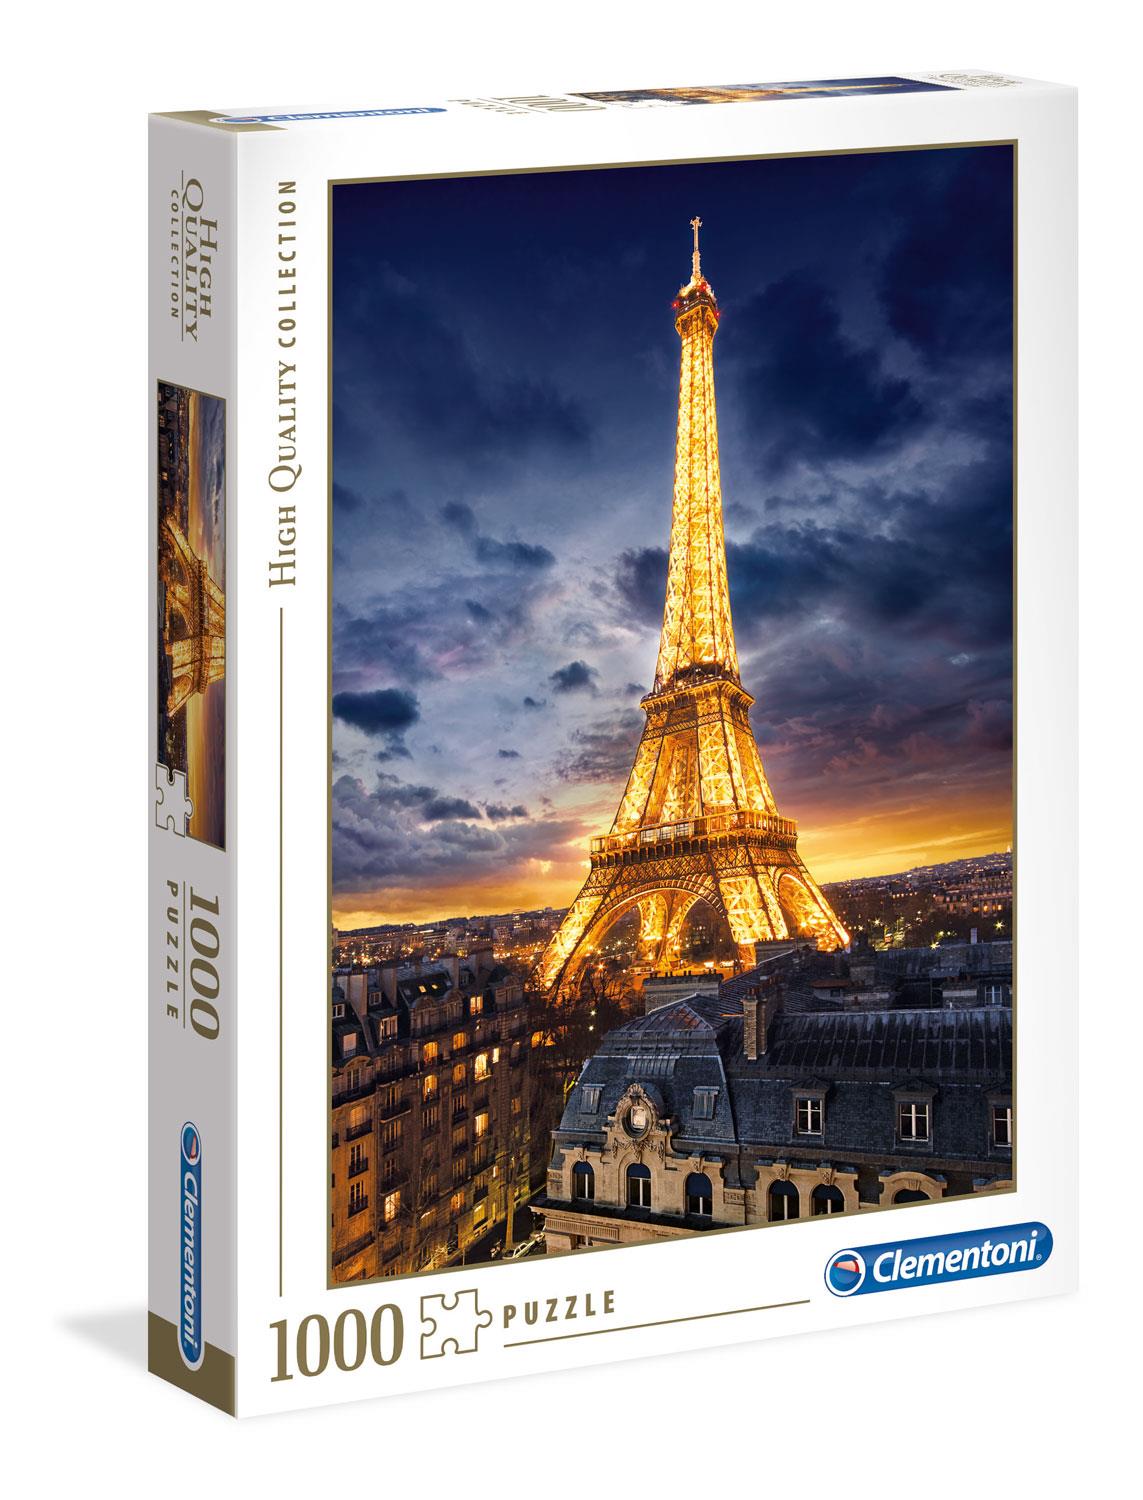 Clementoni Eiffel Tower High Quality Jigsaw Puzzle (1000 Pieces)